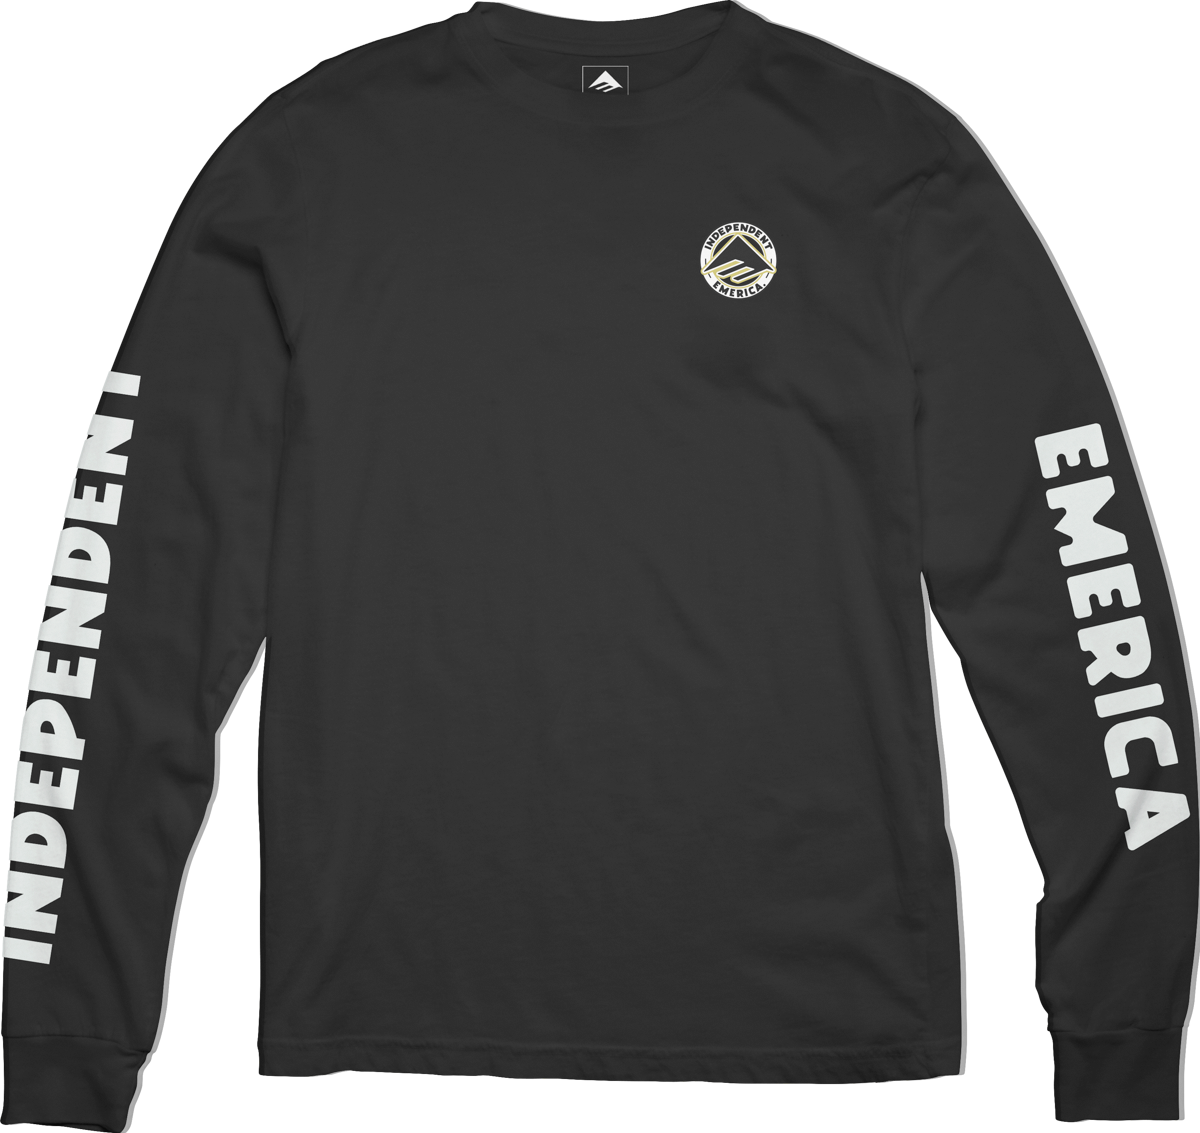 EMERICA X INDEPENDENT CIRCLE L/S TEE